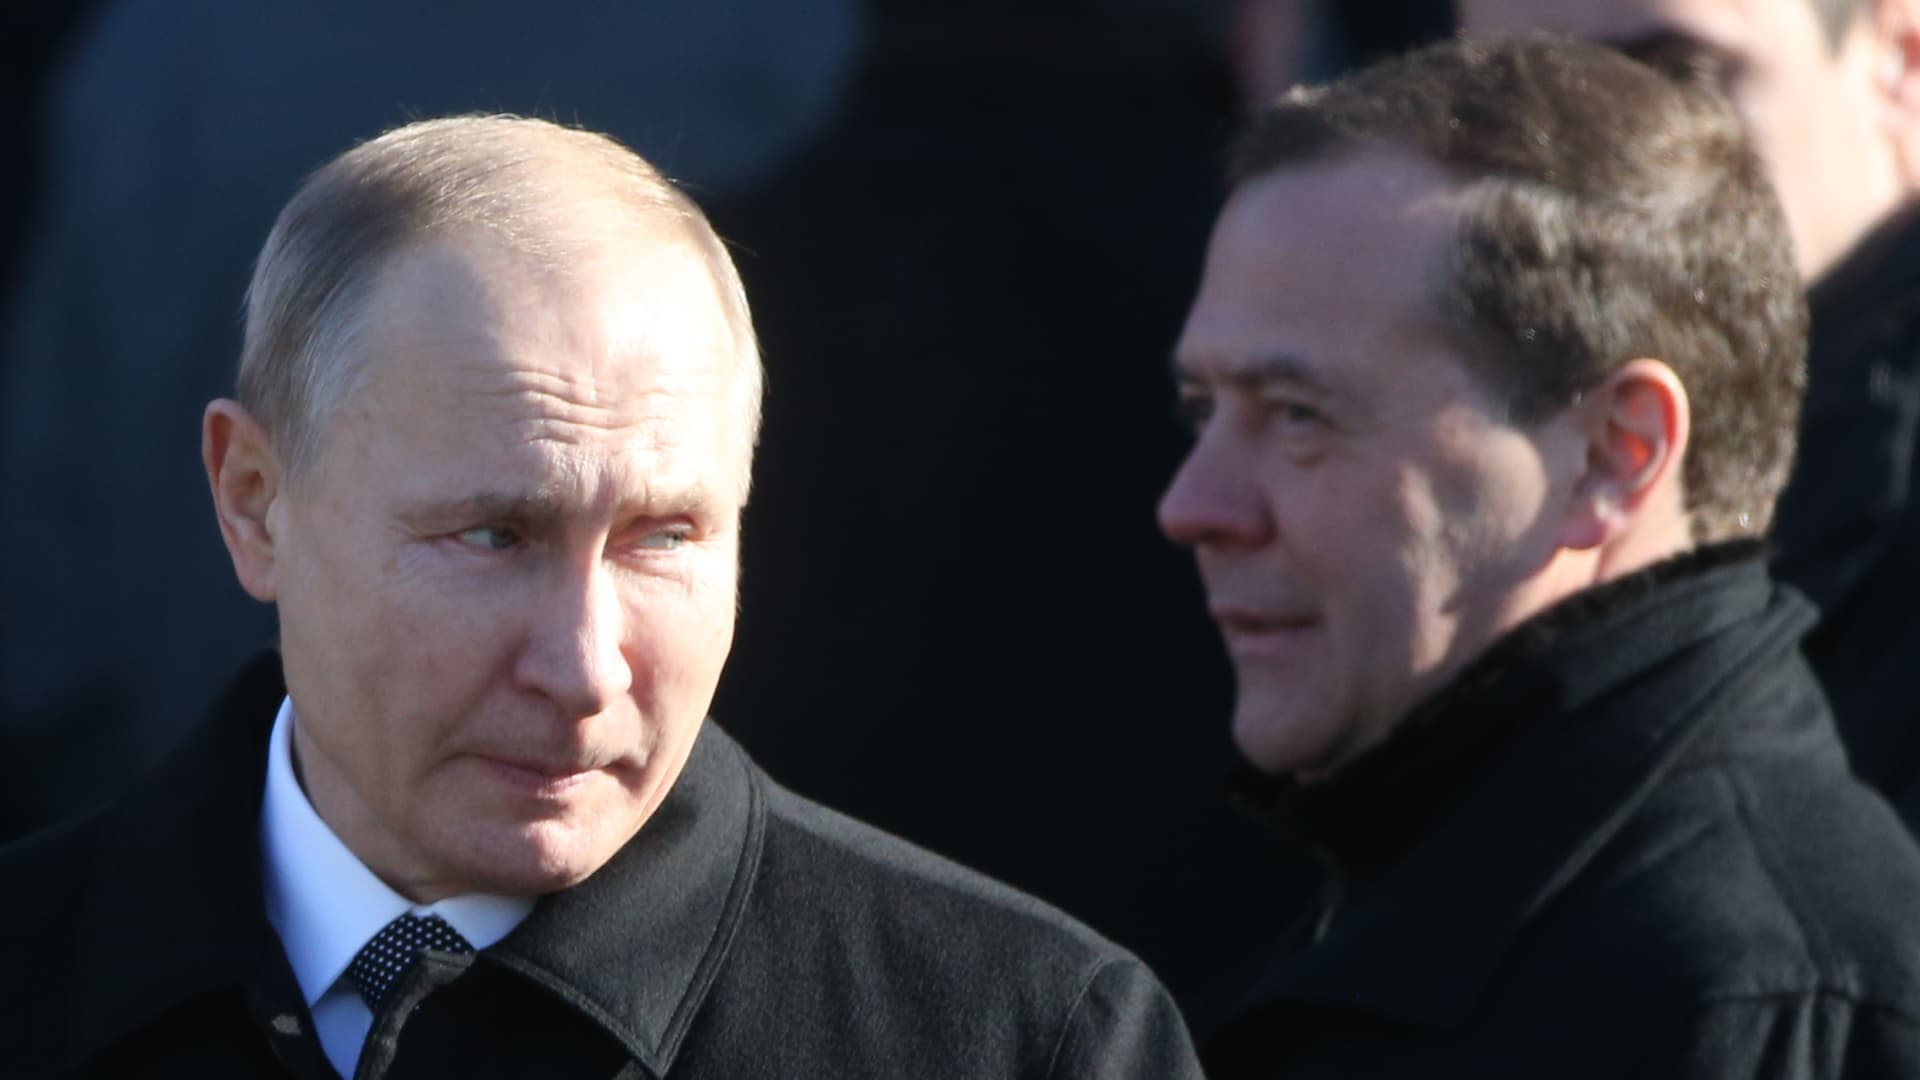 Russian President Vladimir Putin and then-Prime Minister Dmitry Medvedev in Moscow, Russia, February 23, 2018.